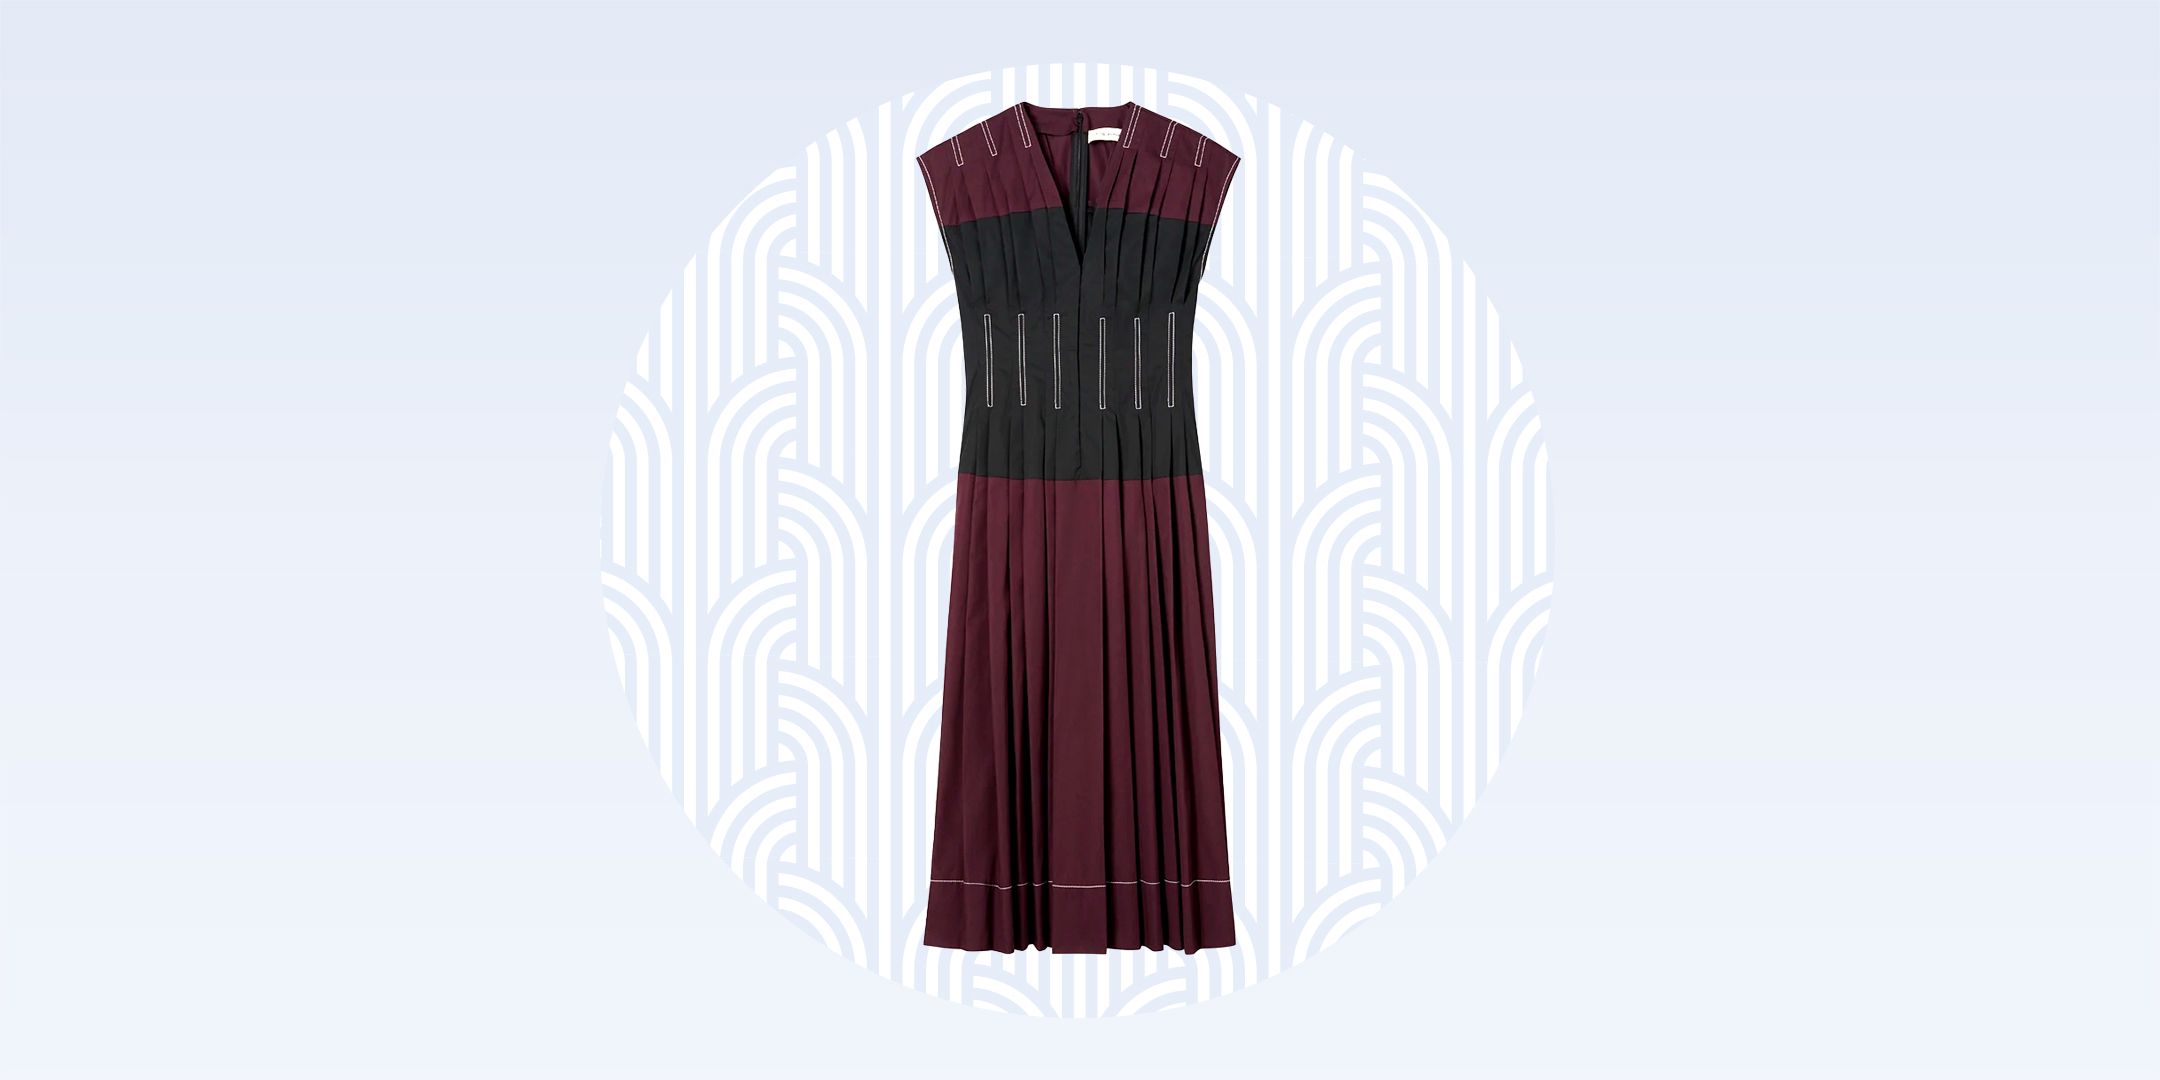 Tory Burch Claire McCardell Dress Review: Why We Love It